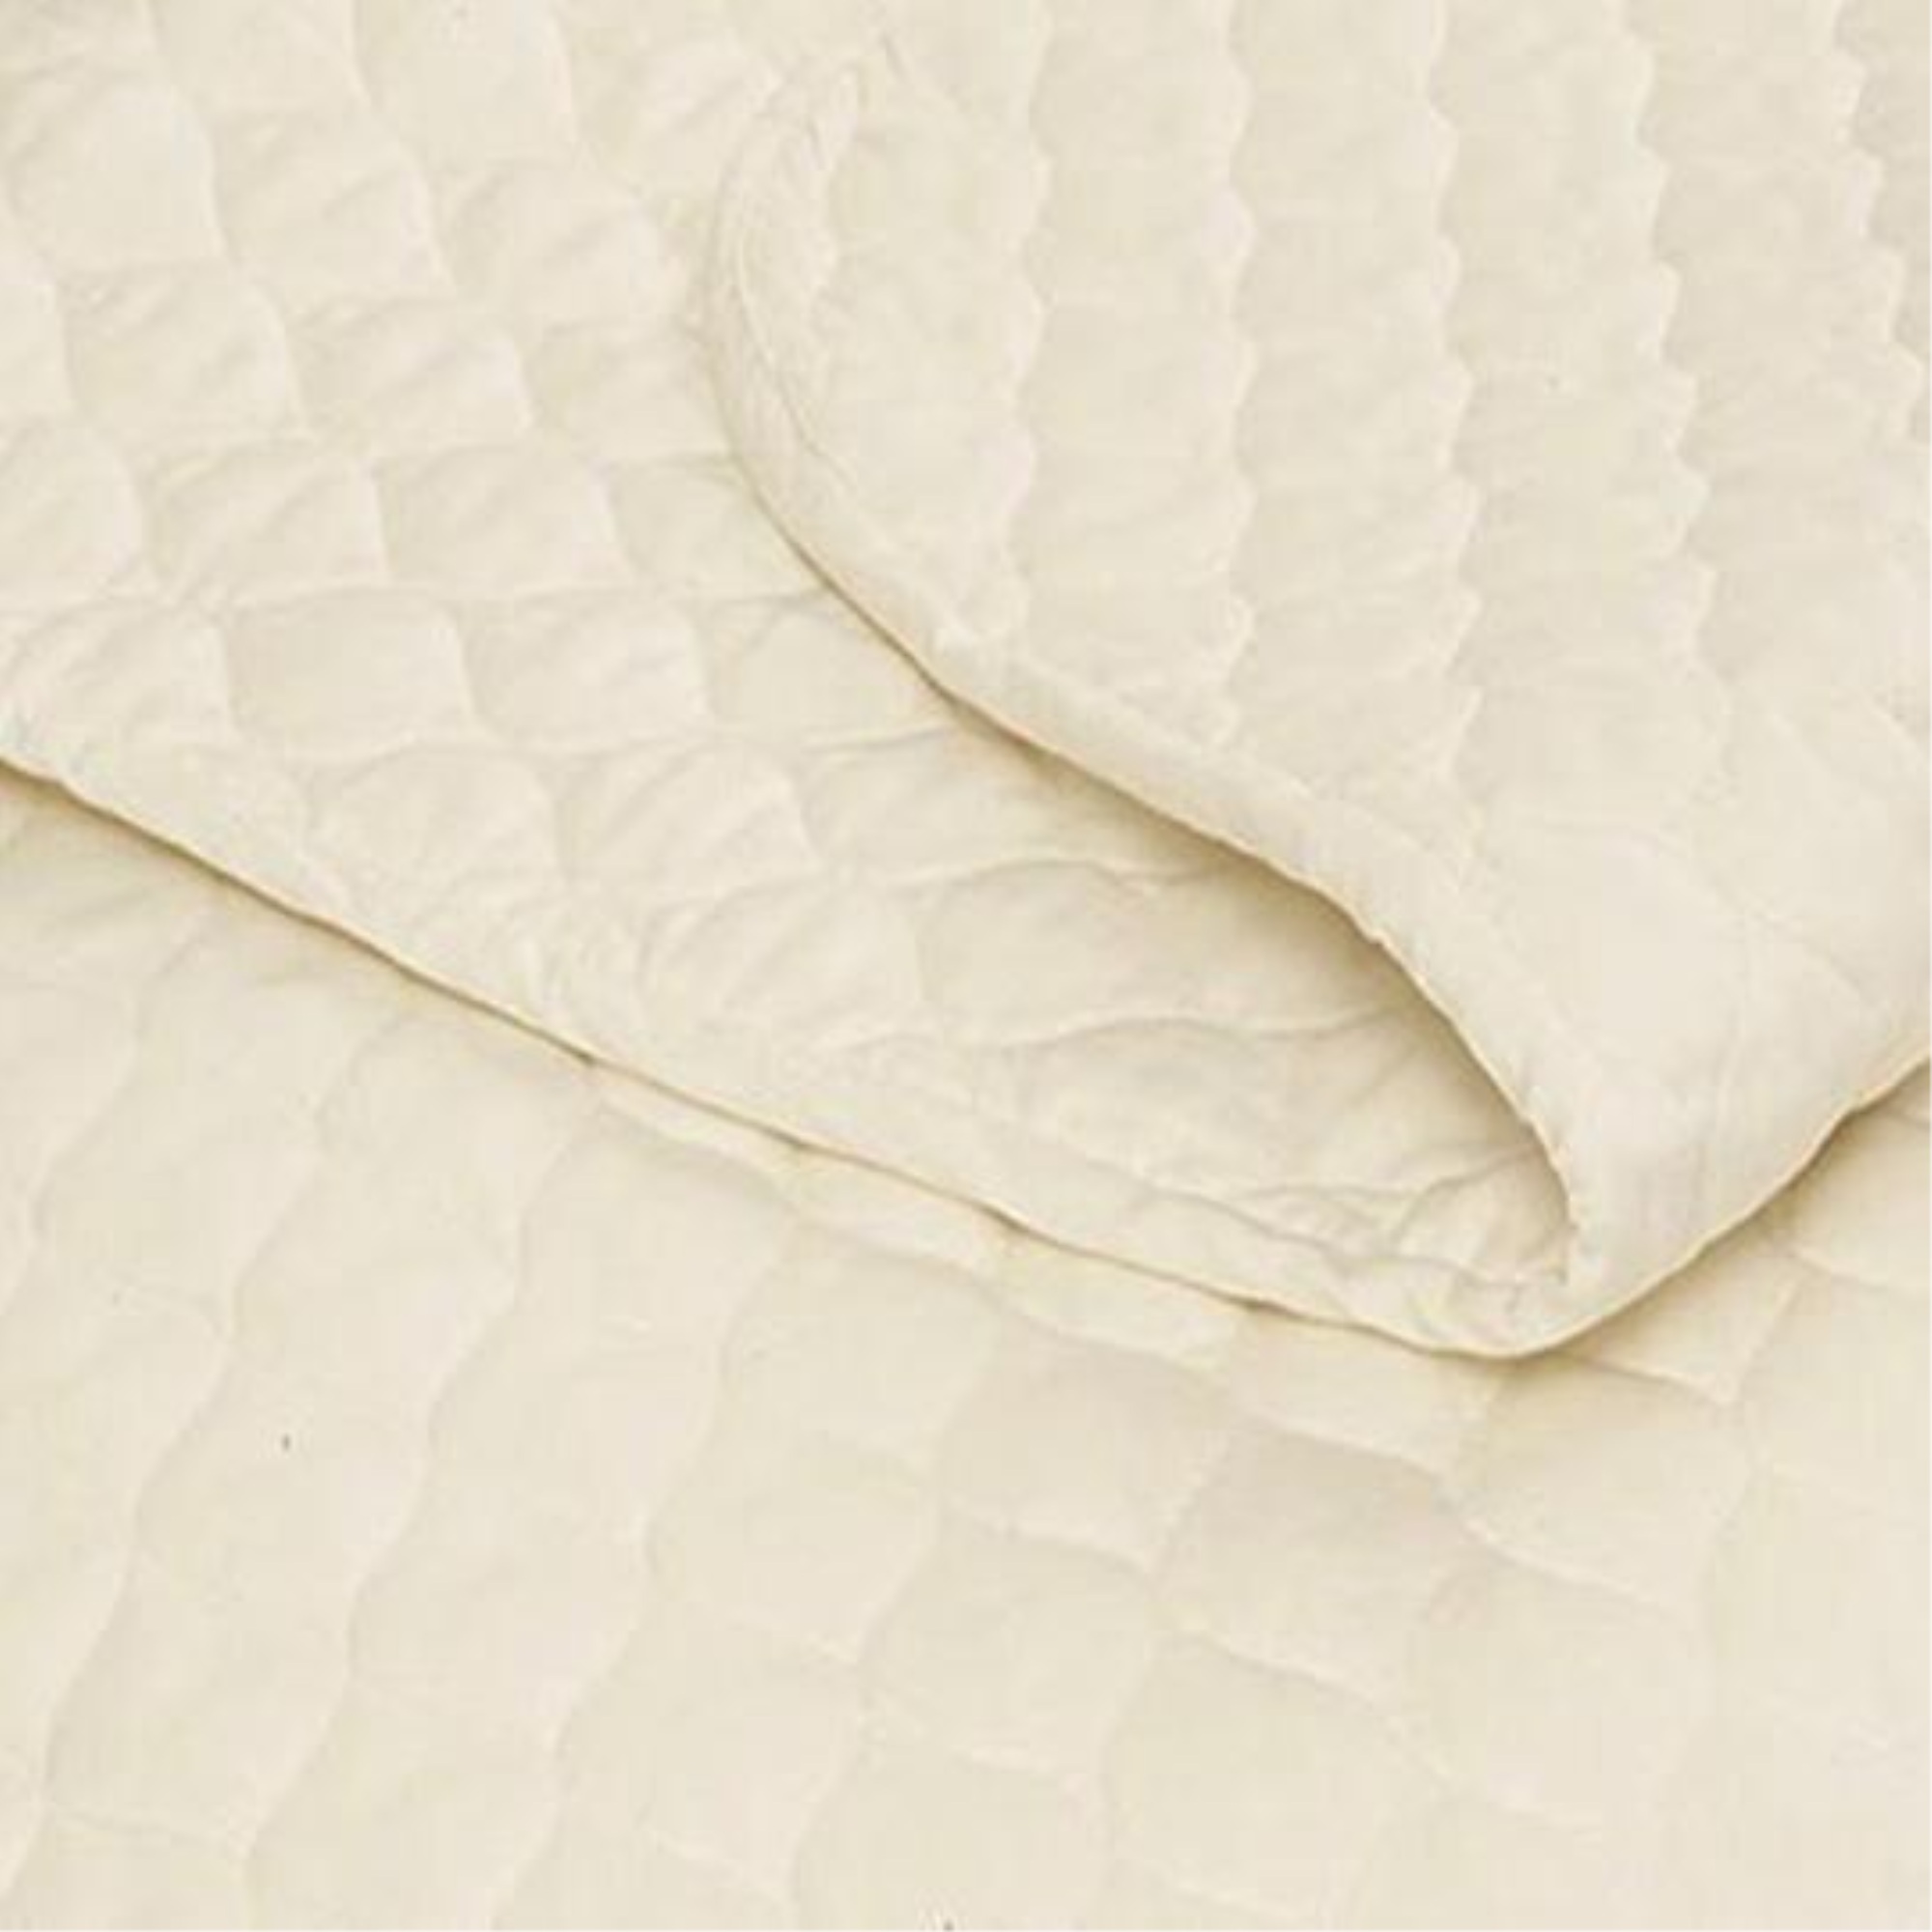 Healthy Body Head to Toe 100% Organic Cotton Fully Quilted Machine Wash/Dry Pad - DaVinci Mini 23 x 36.5"